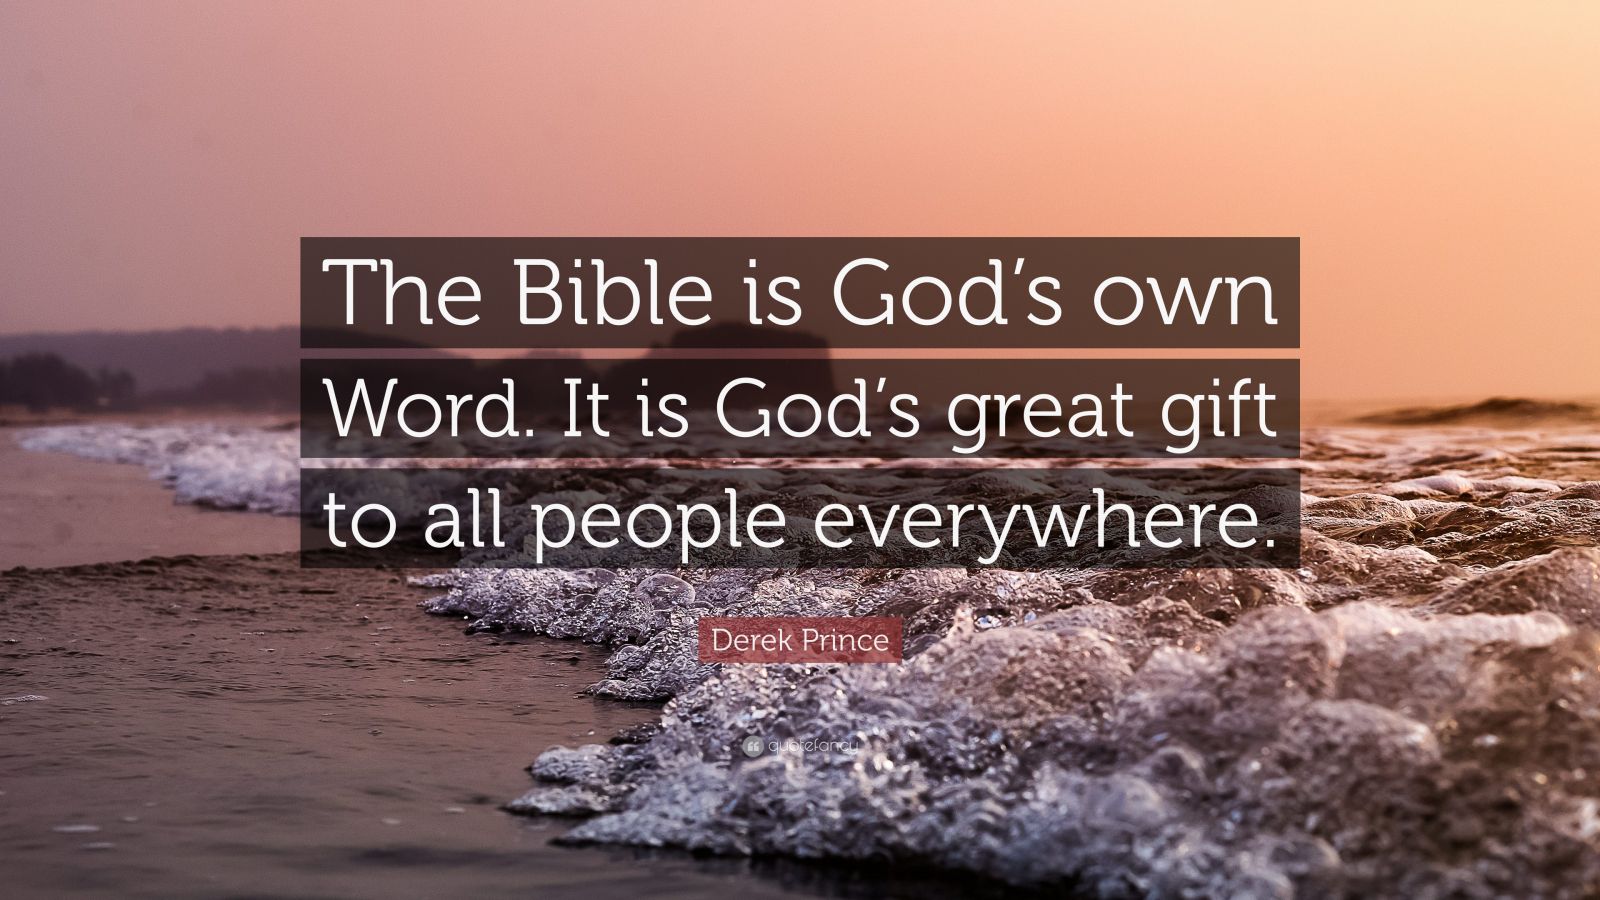 Derek Prince Quote: “The Bible is God's own Word. It is God's ...